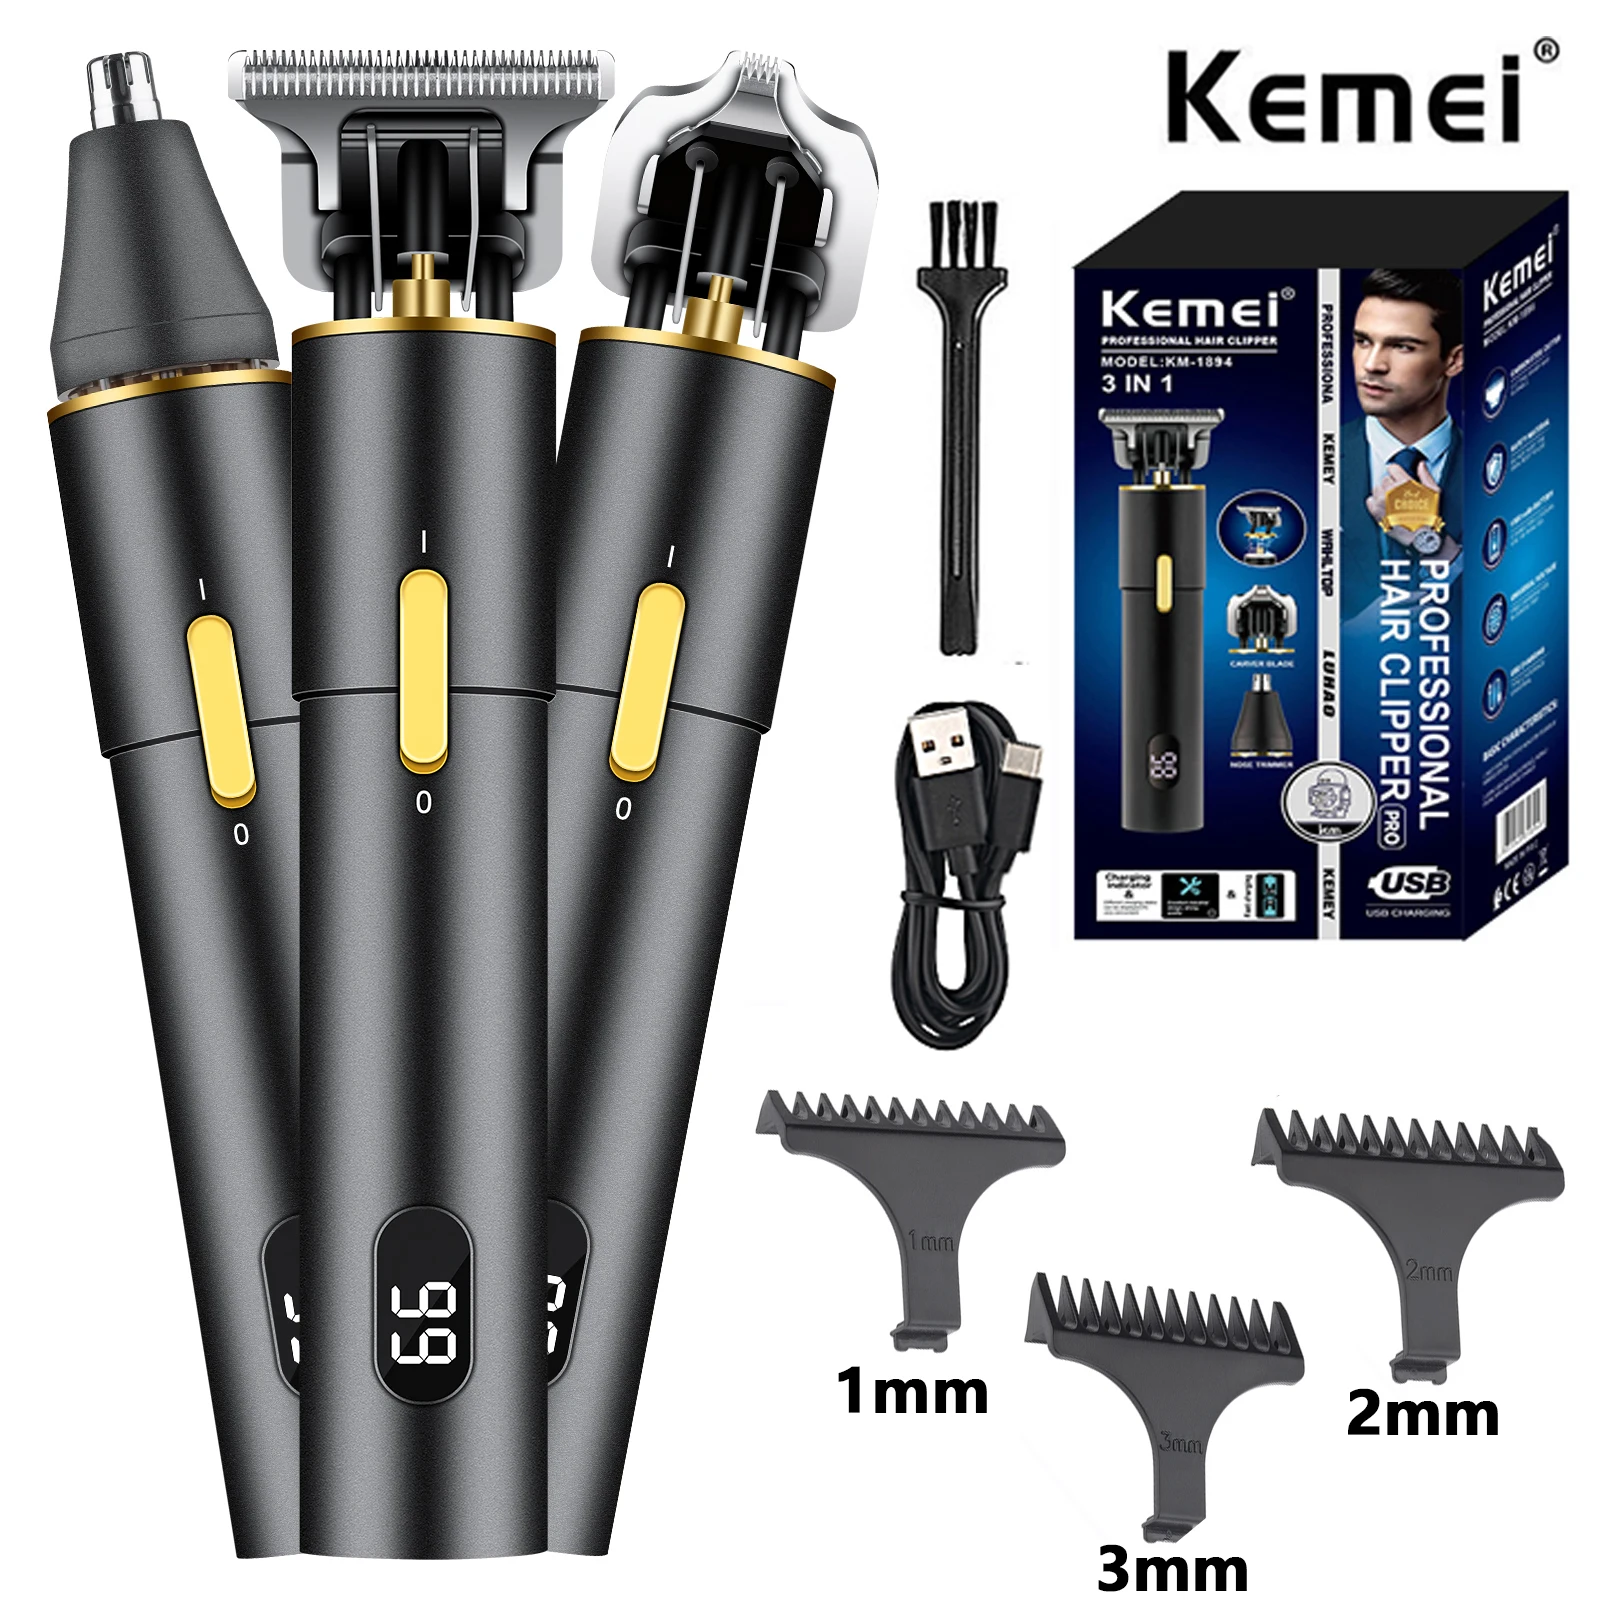 

Kemei KM-1894 3 in 1 Hair cutting machine LCD Nose Hair Trimmer for Men's shaver rechargeable Electric Razor Barber Hair Clipper